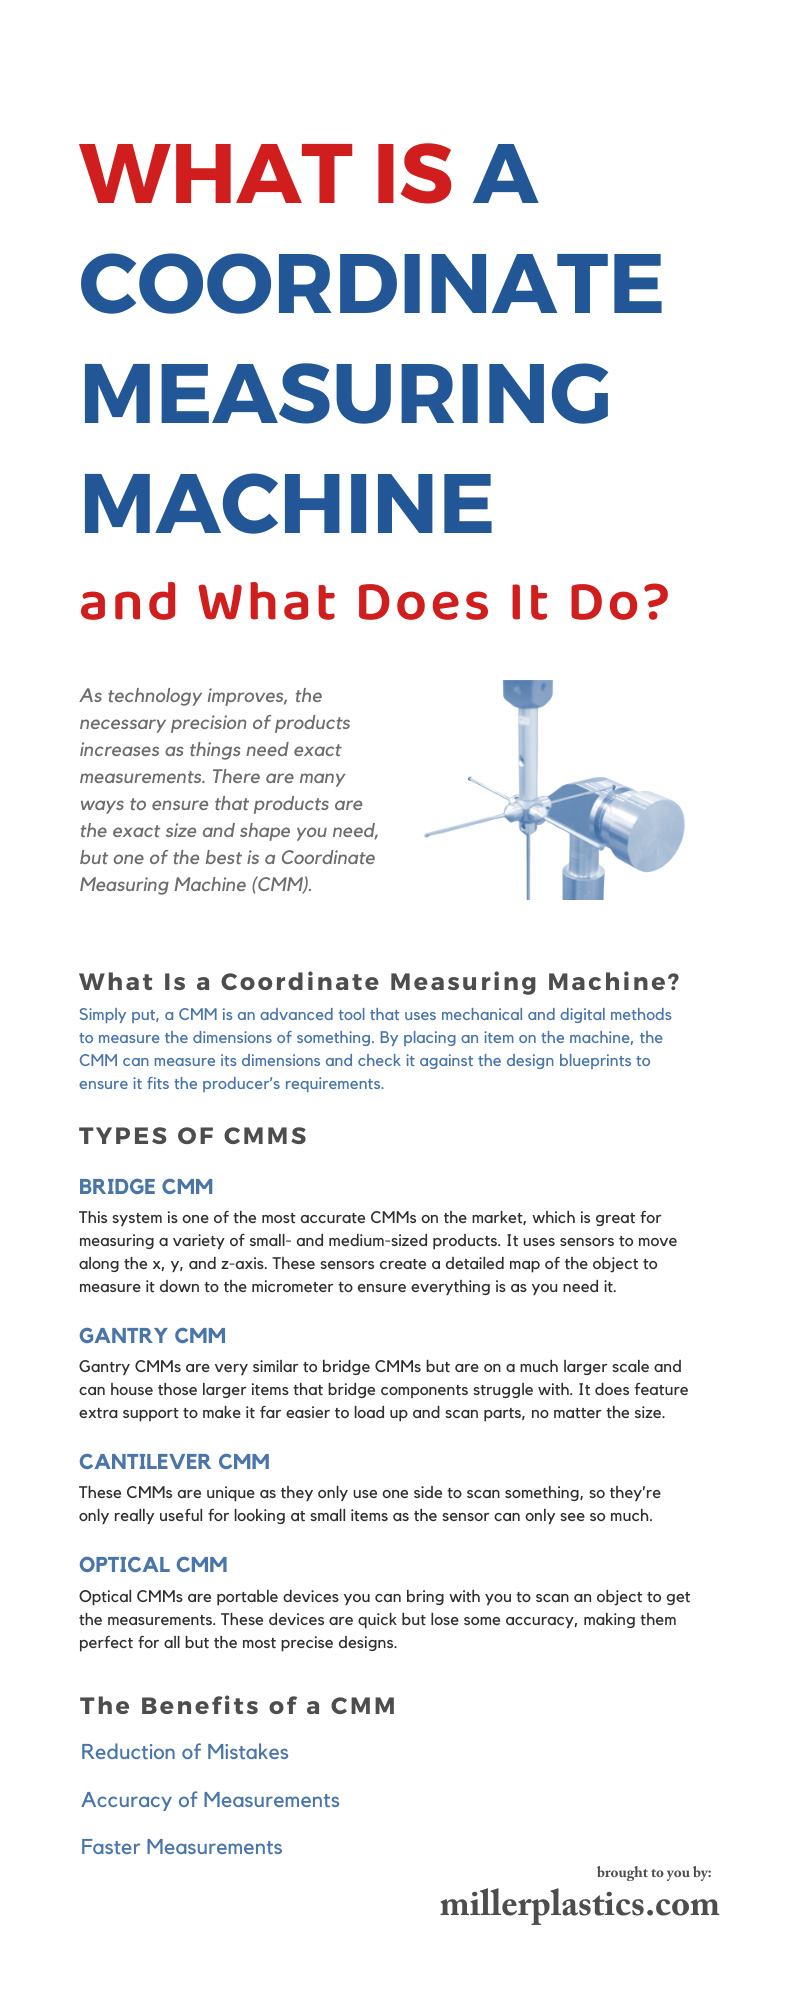 What Is a Coordinate Measuring Machine and What Does It Do?